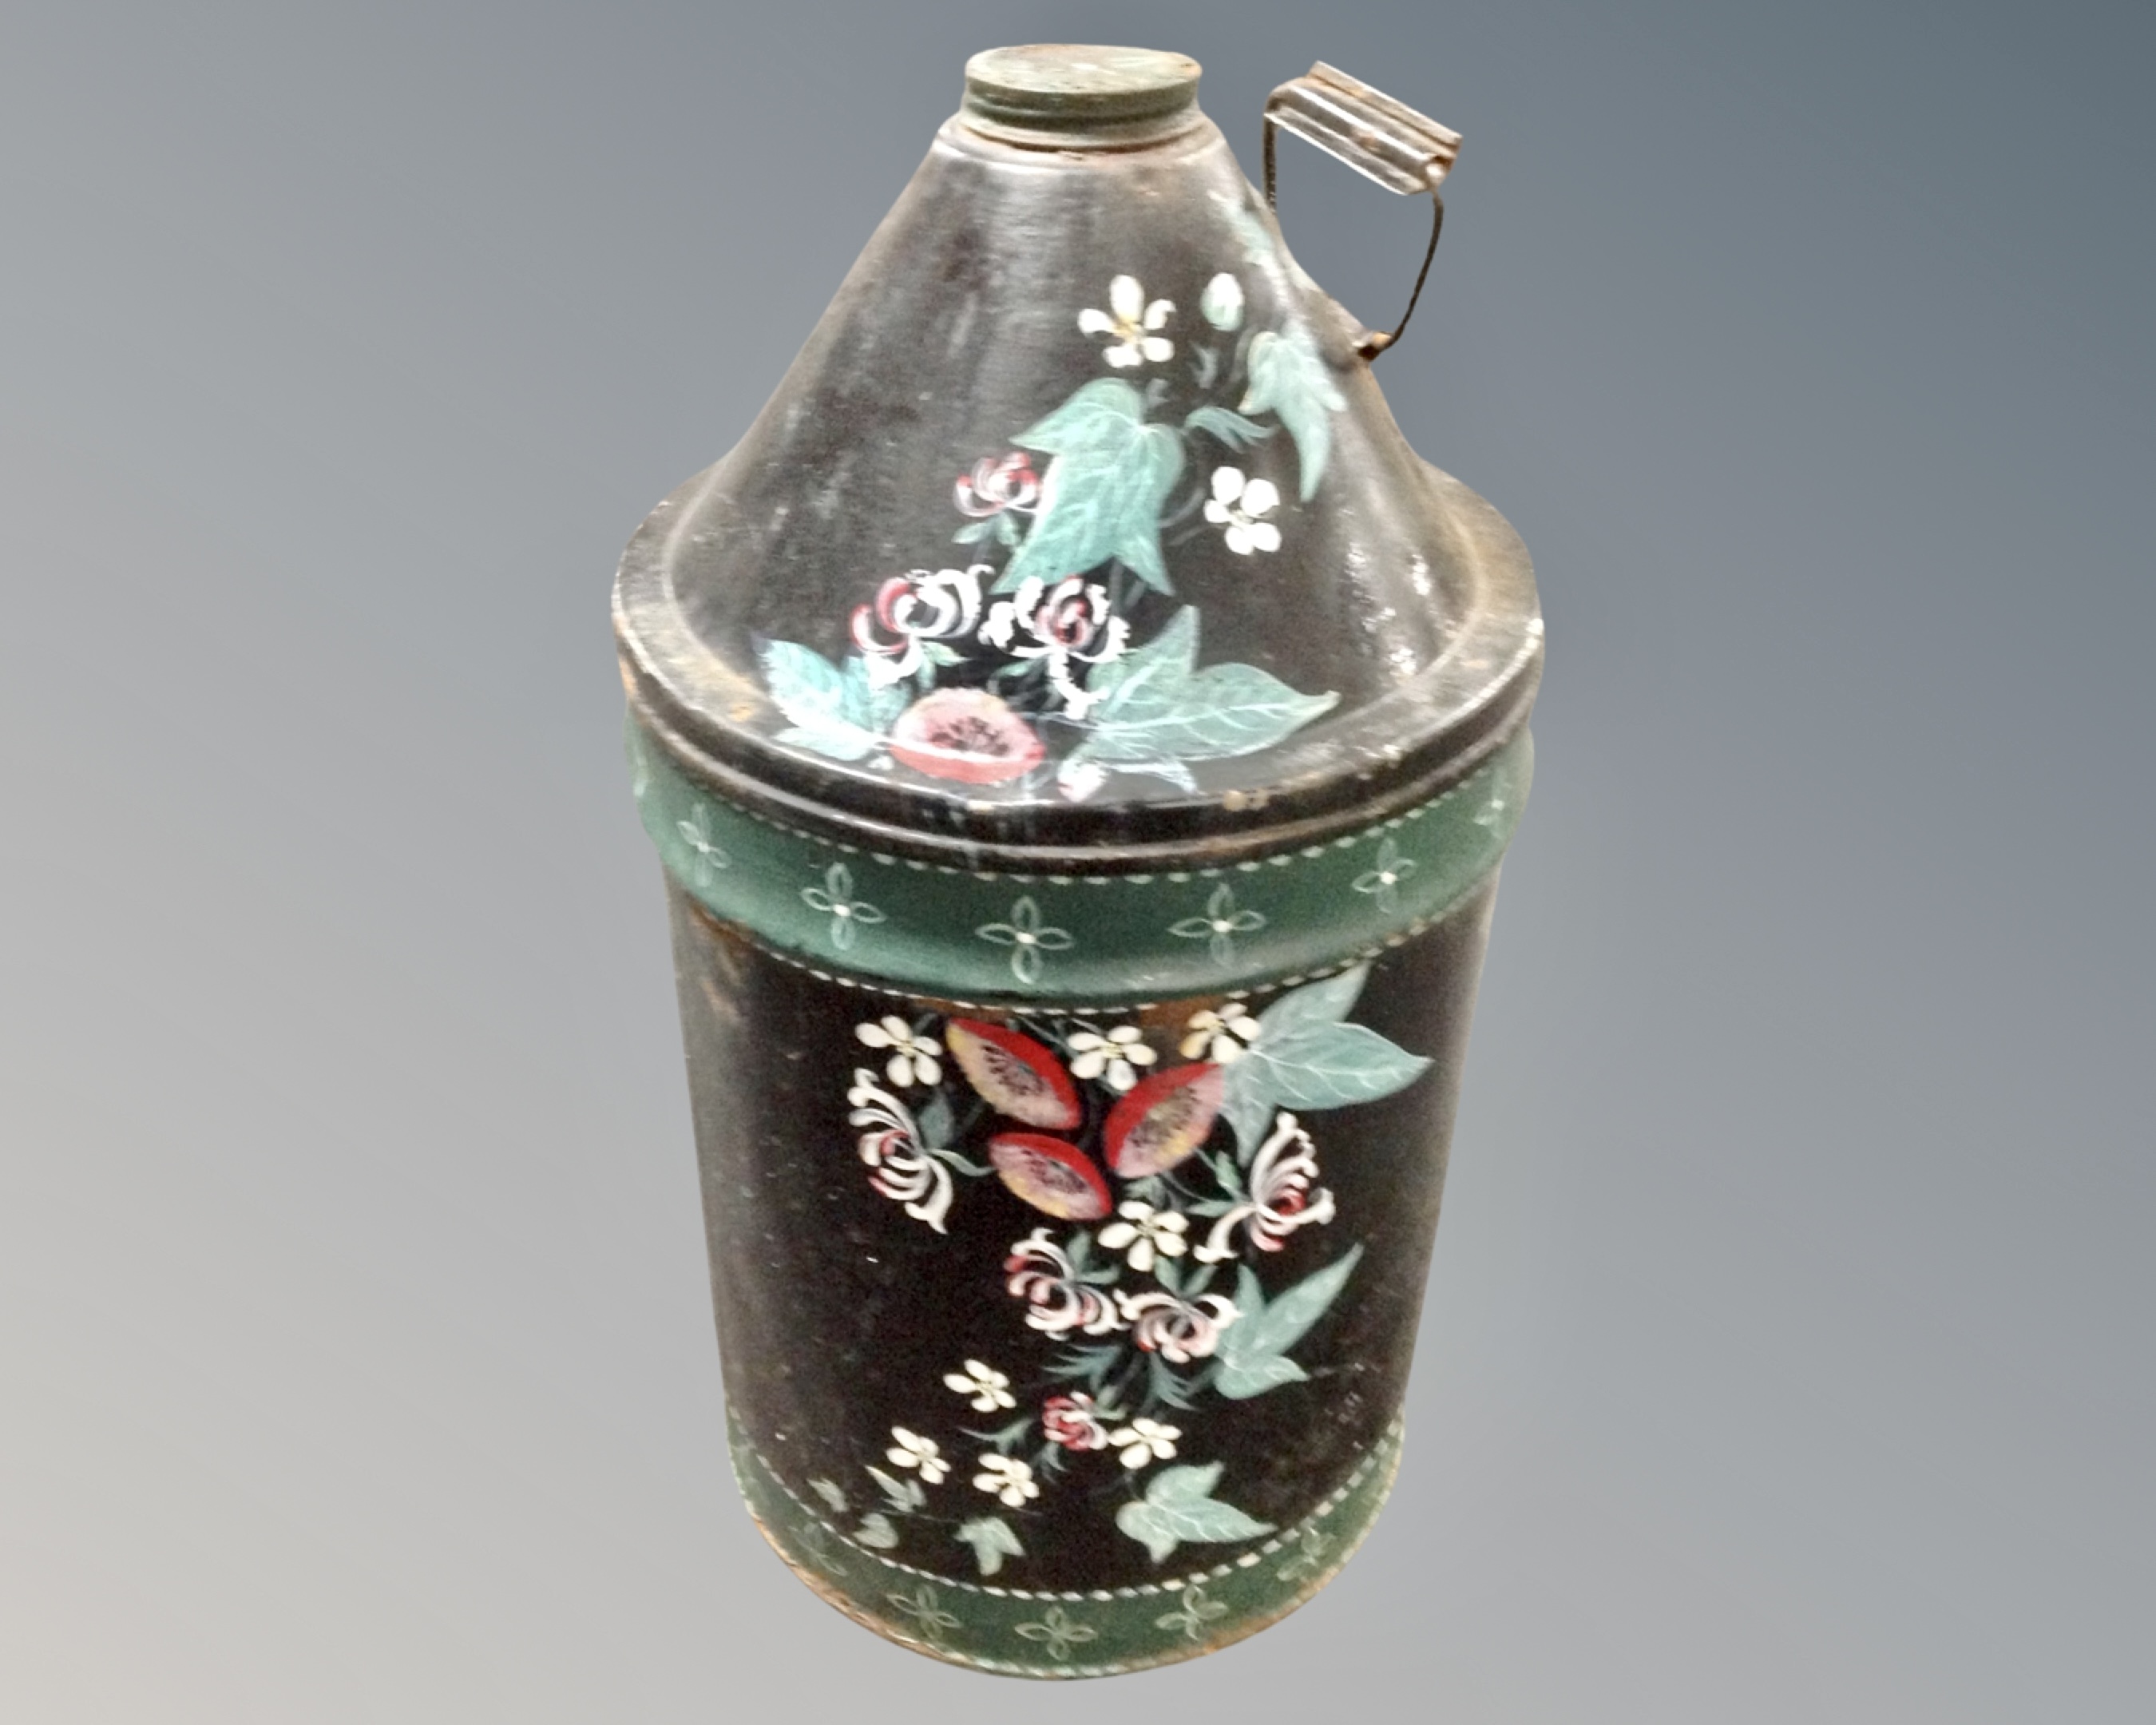 An antique hand painted metal canister